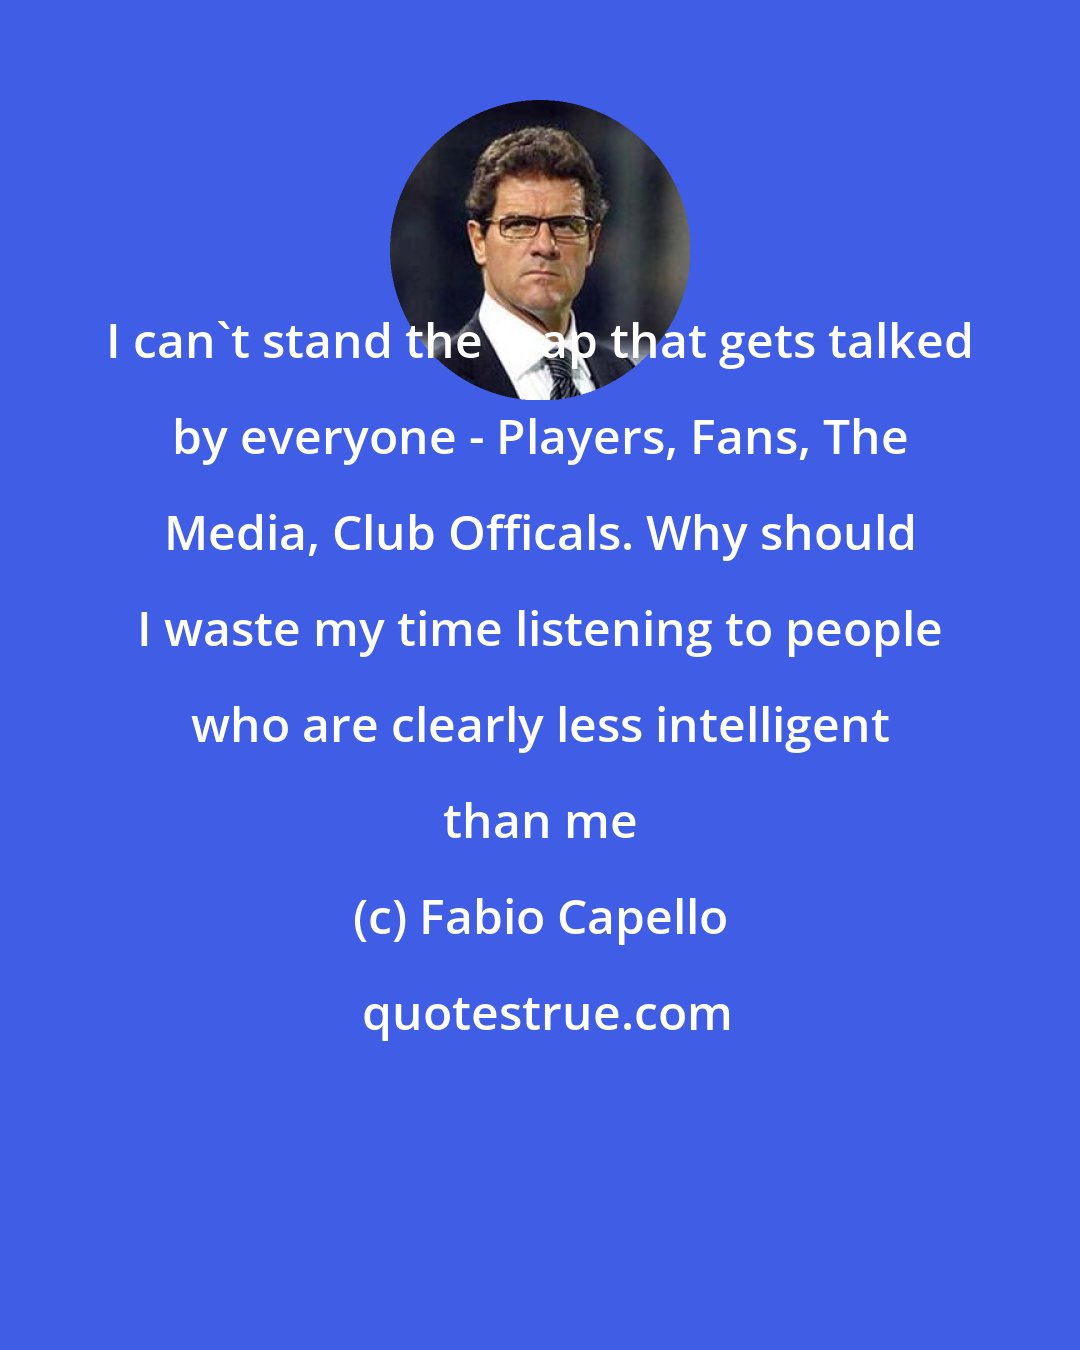 Fabio Capello: I can't stand the crap that gets talked by everyone - Players, Fans, The Media, Club Officals. Why should I waste my time listening to people who are clearly less intelligent than me